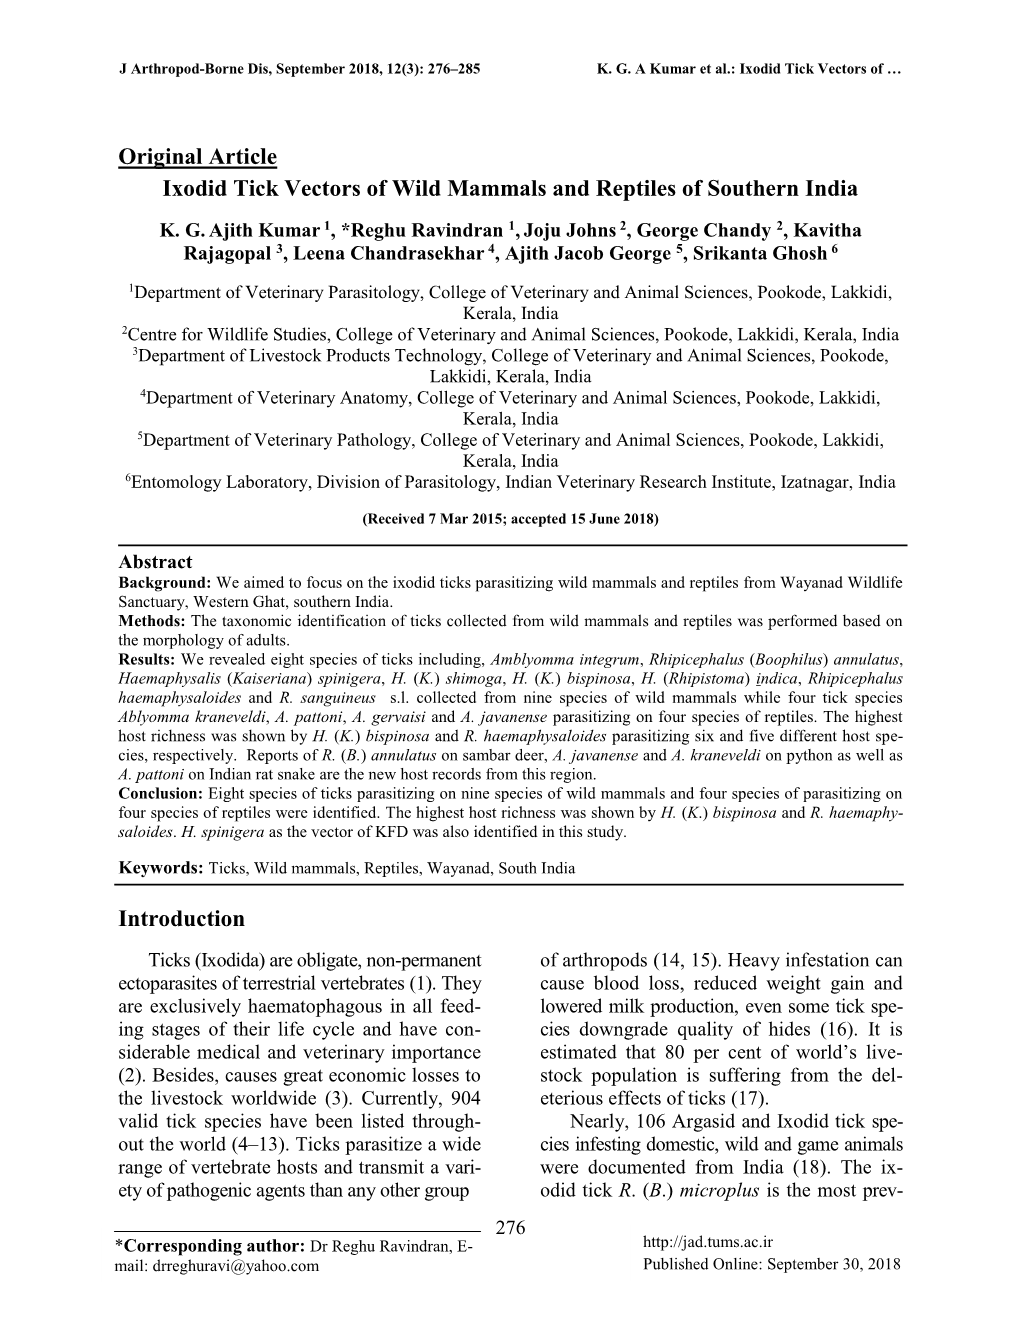 Original Article Ixodid Tick Vectors of Wild Mammals and Reptiles of Southern India Introduction